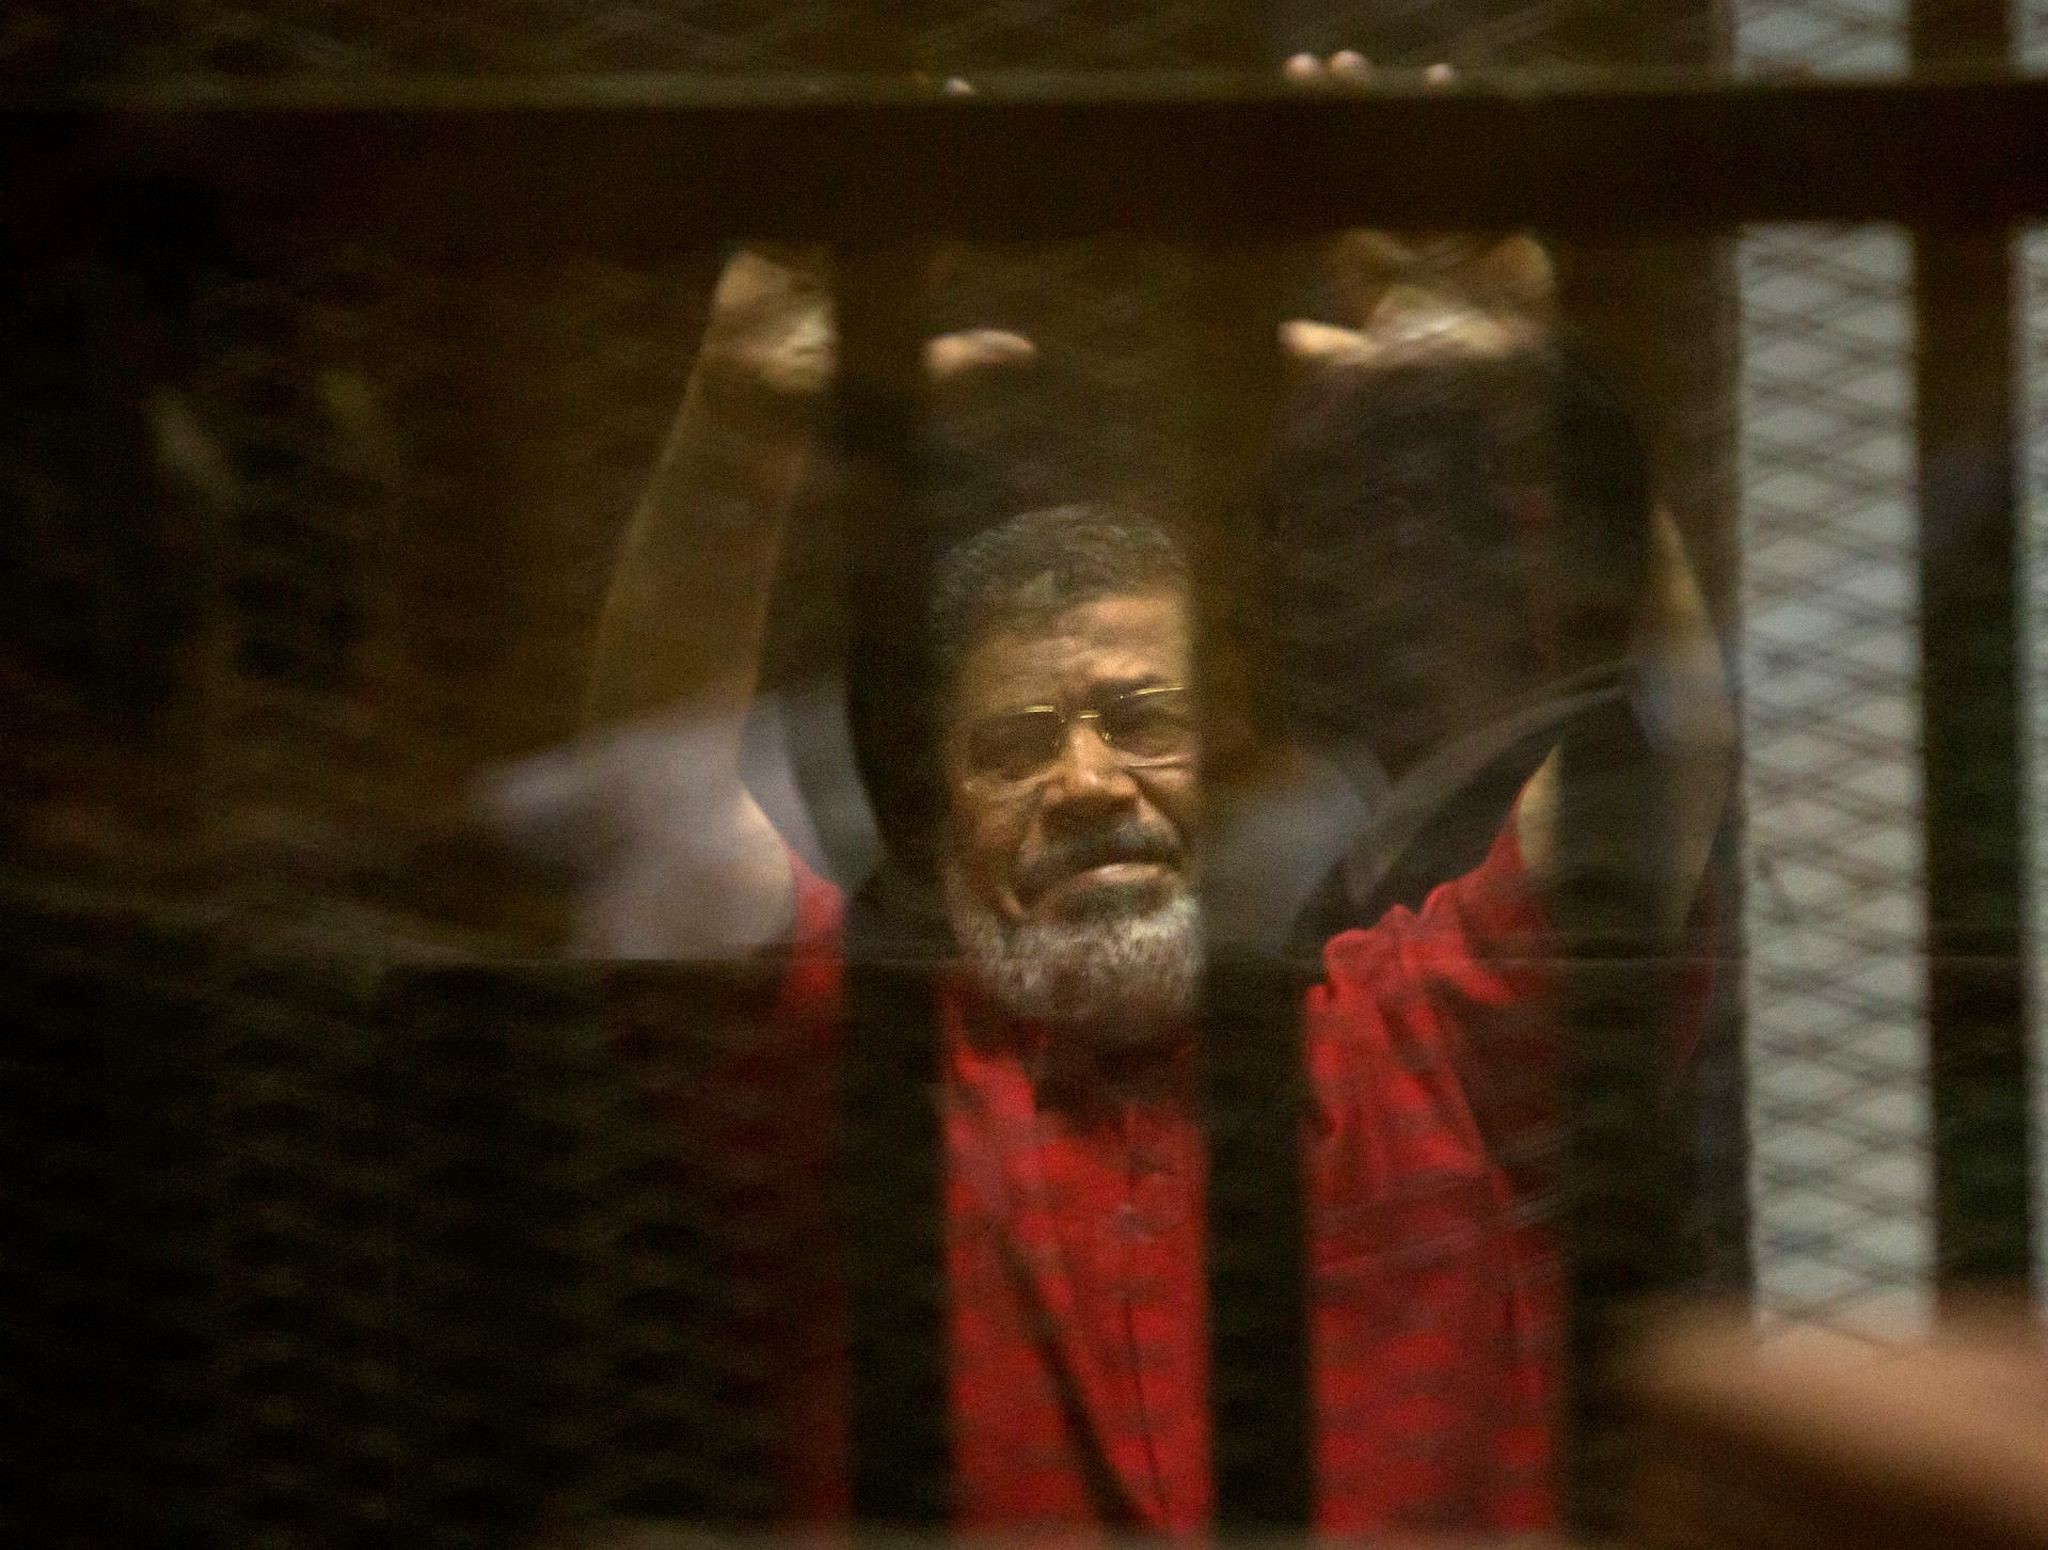 Former Egyptian President Mohammed Morsi raises his hands inside a defendants cage in a makeshift courtroom at the national police academy, in an eastern suburb of Cairo, Egypt, Saturday, June 18, 2016. (AP Photo)